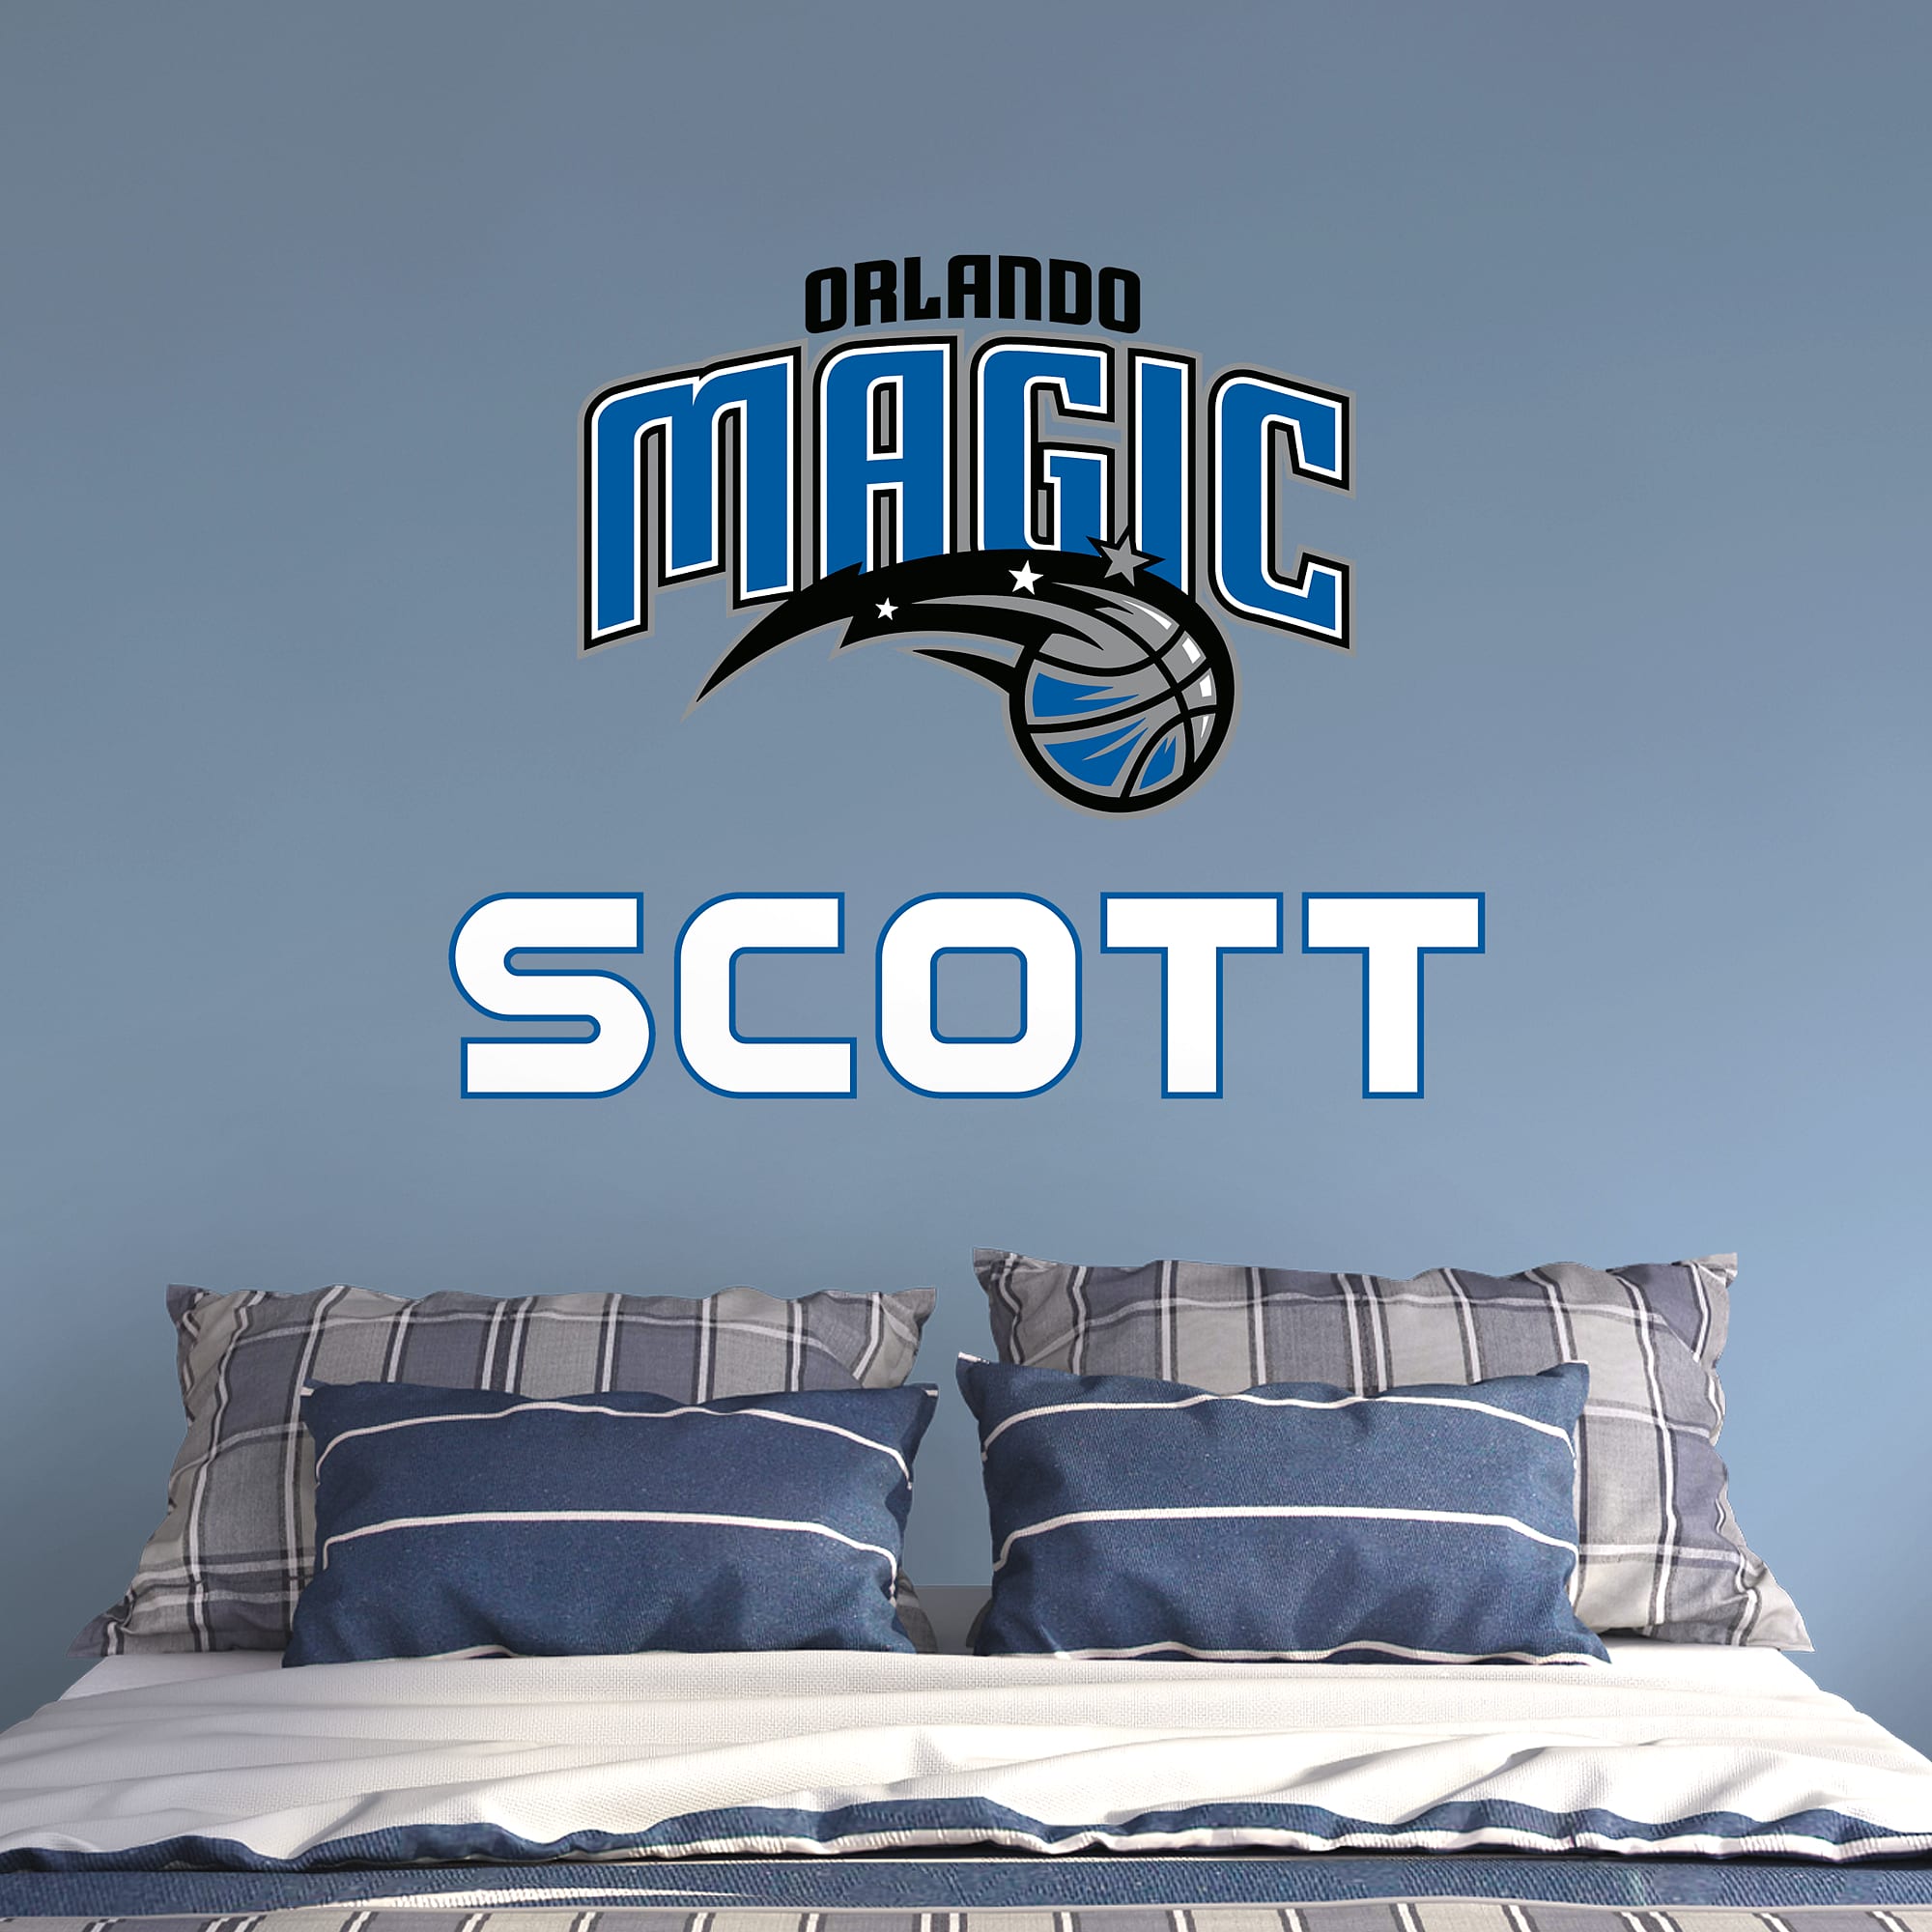 Orlando Magic: Stacked Personalized Name - Officially Licensed NBA Transfer Decal in White (52"W x 39.5"H) by Fathead | Vinyl